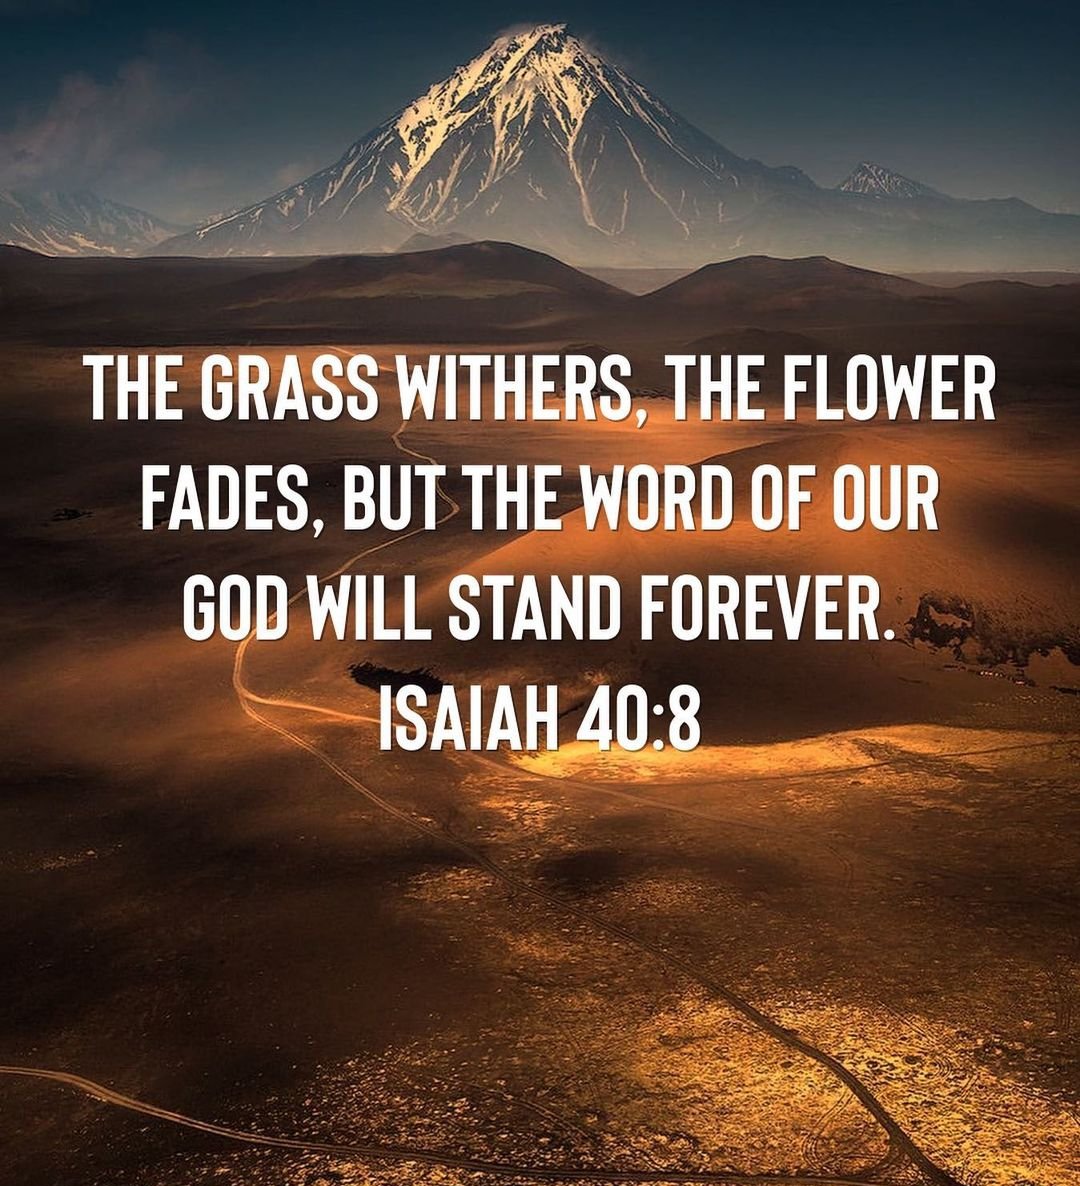 THE GRASS WITHERS, THE FLOWER FADES, BUT THE WORD OF OUR GOD WILL STAND FOREVER: ISAIAH 40;8